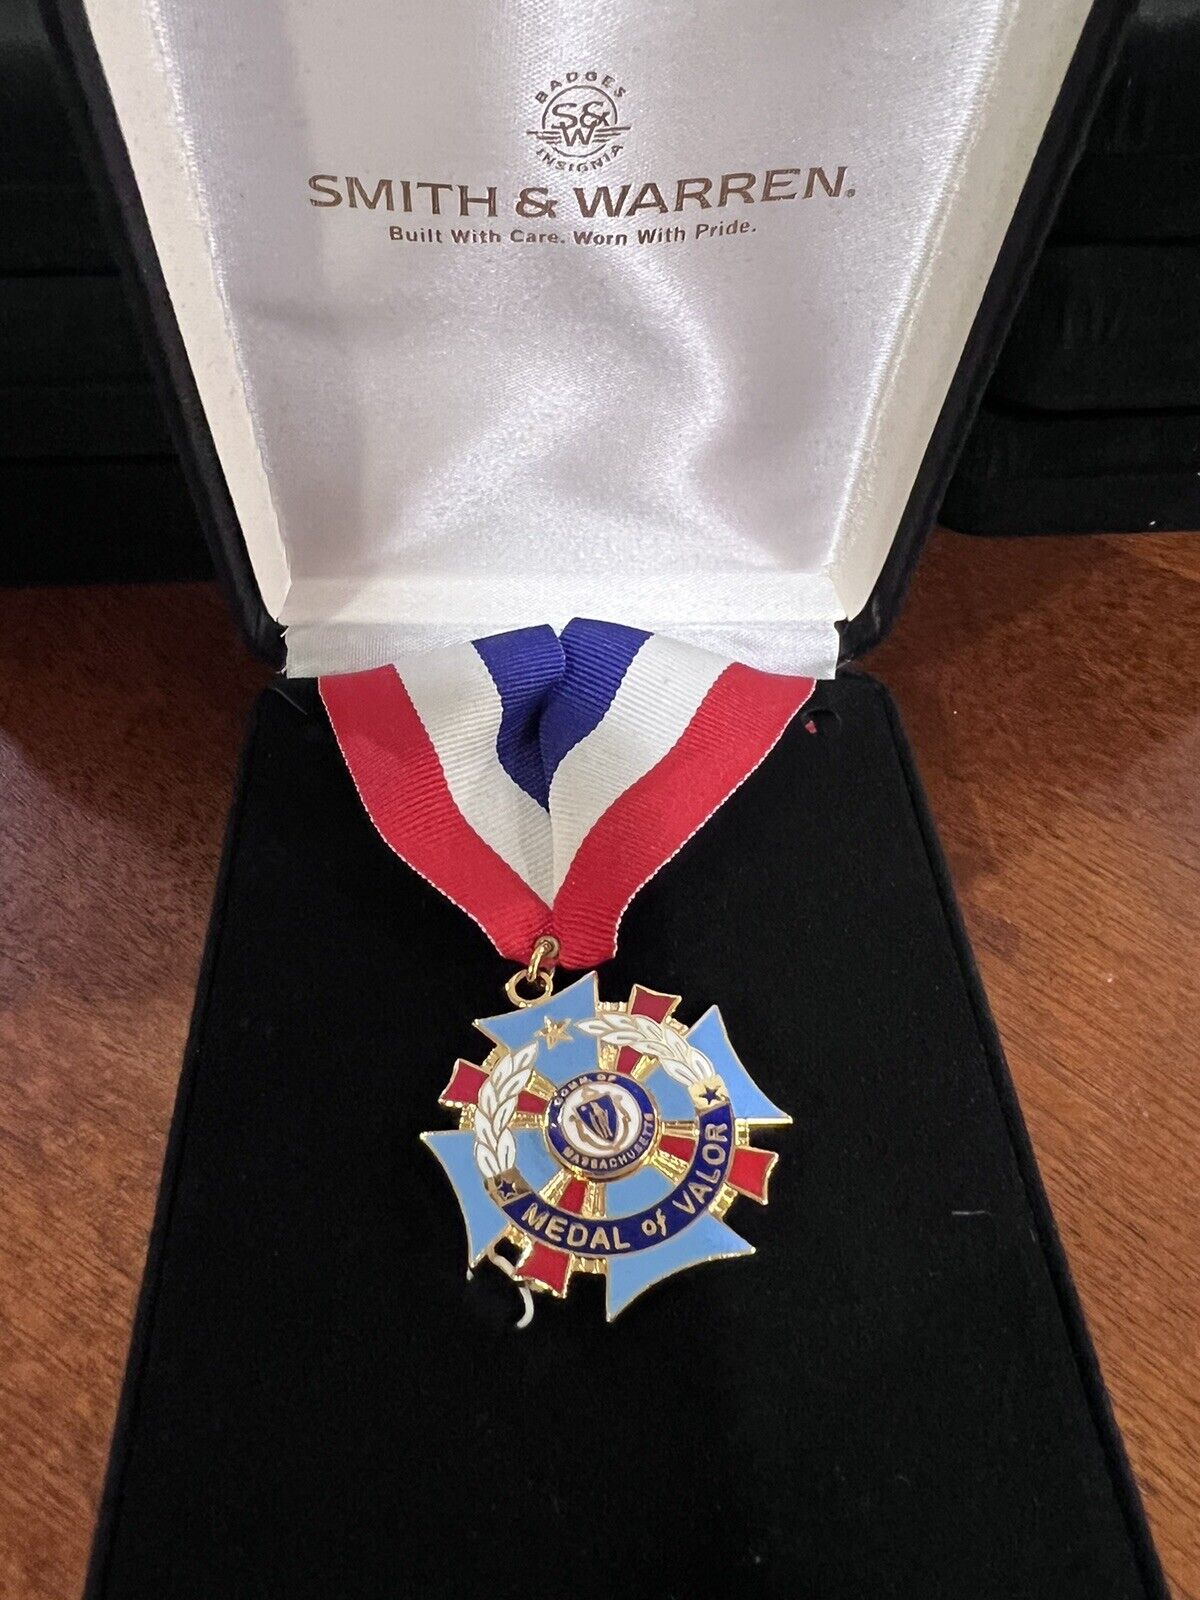 Massachusetts Smith & Warren recognition Medal of Valor for any public entity